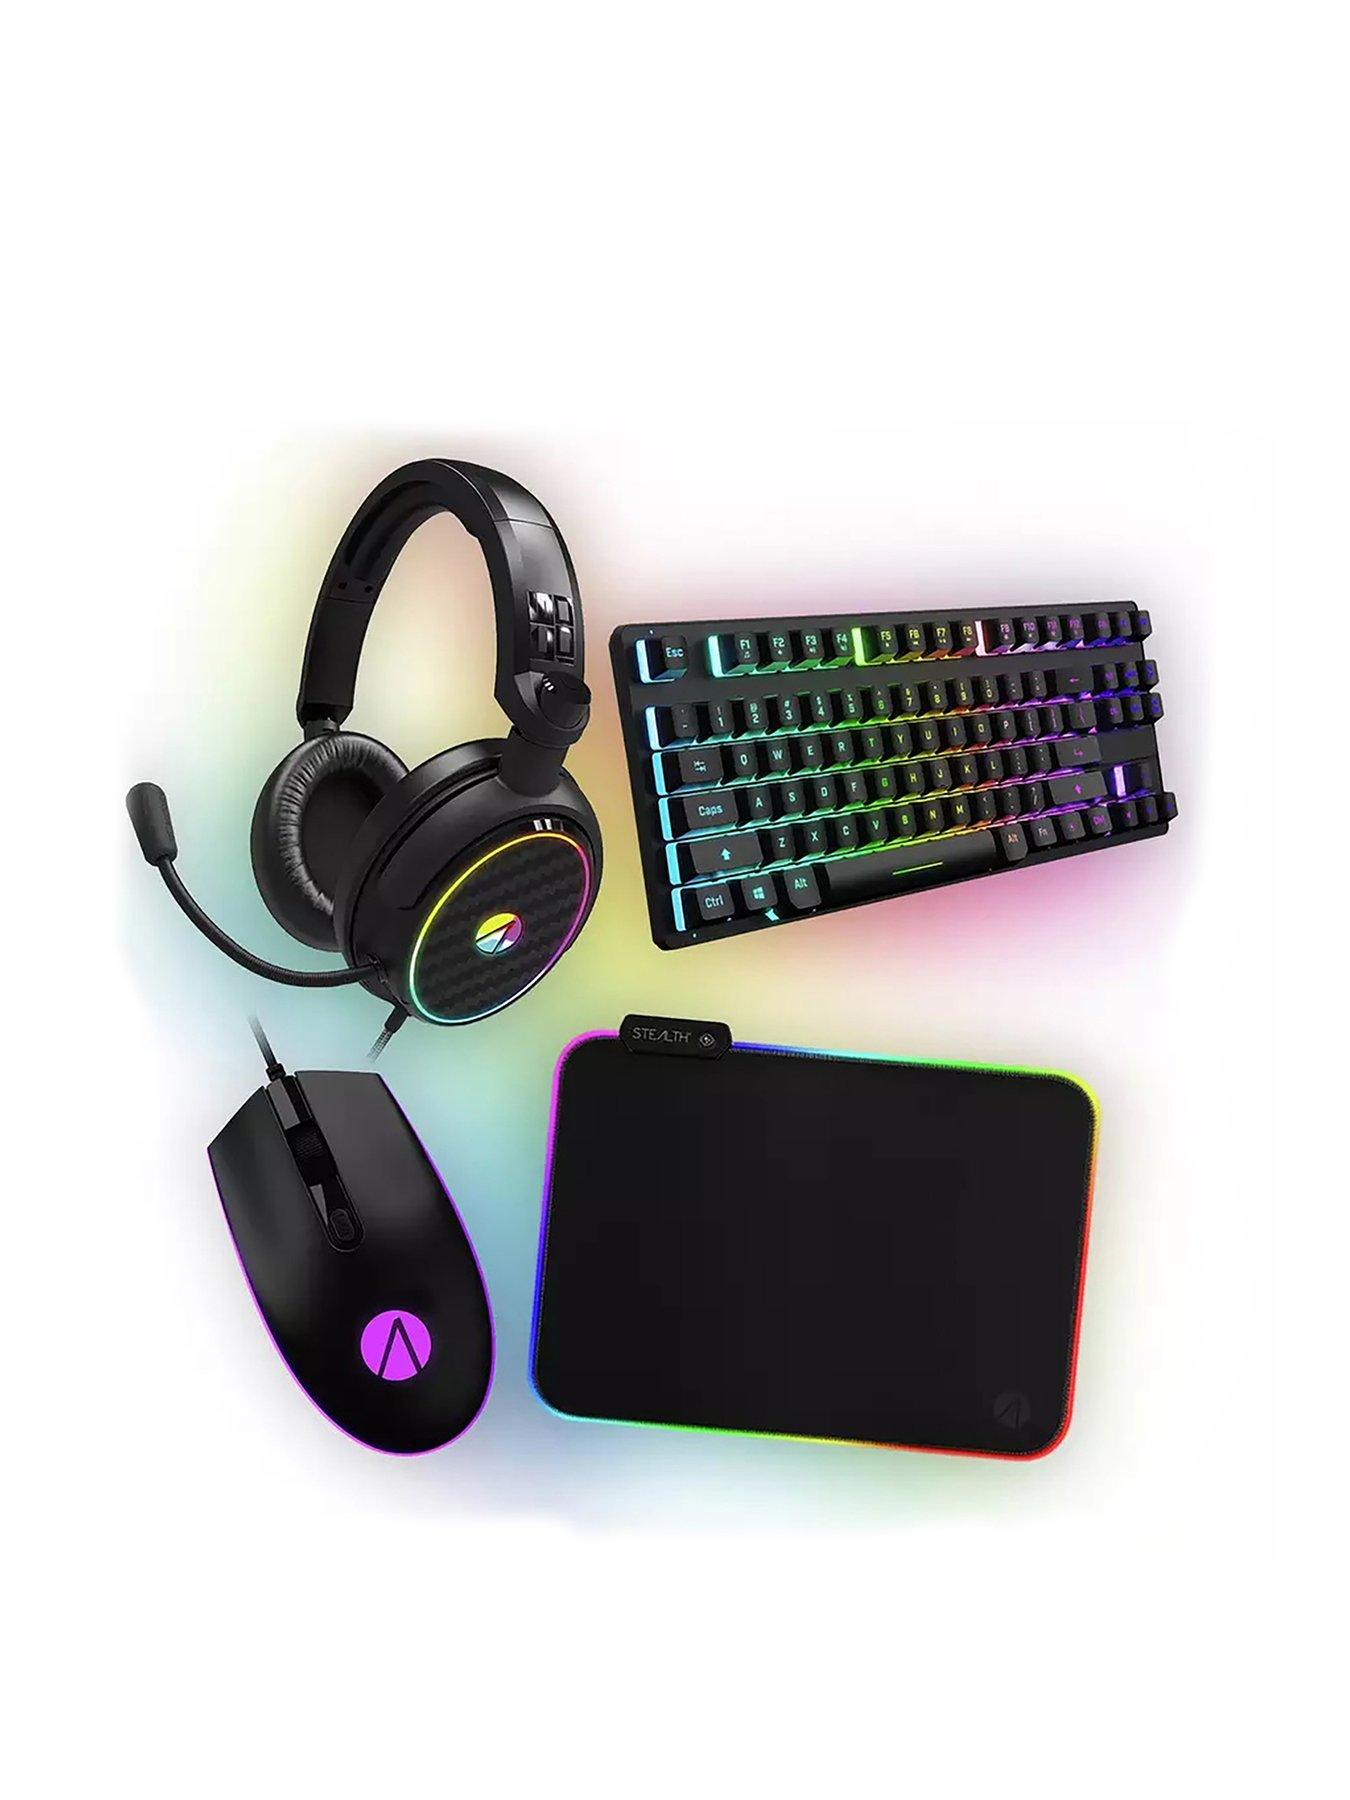 Pad, Gaming LED Bundle Stealth Gaming C6-100 Light - Mouse Mouse, 4-in-1 Headset Keyboard, Up